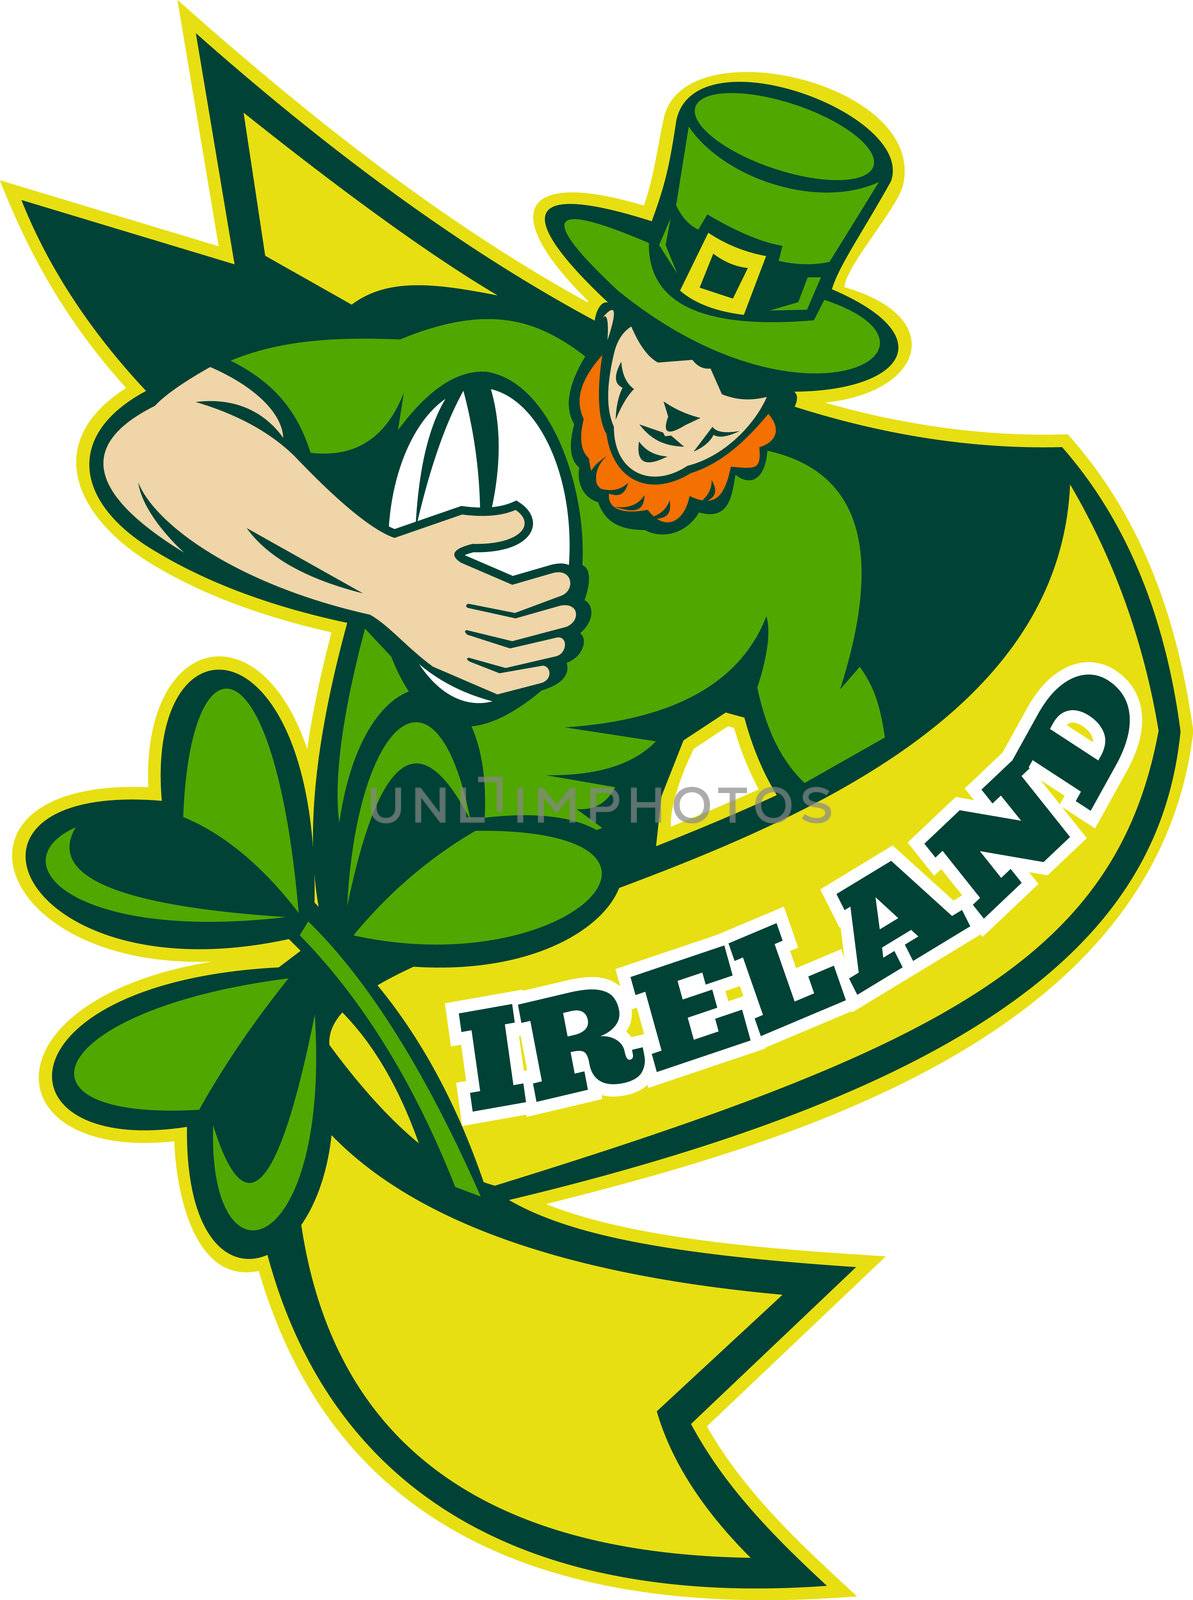 illustration of an Irish rugby player running with ball wearing leprechaun hat with shamrock or clover leaf and scroll with words "Ireland"